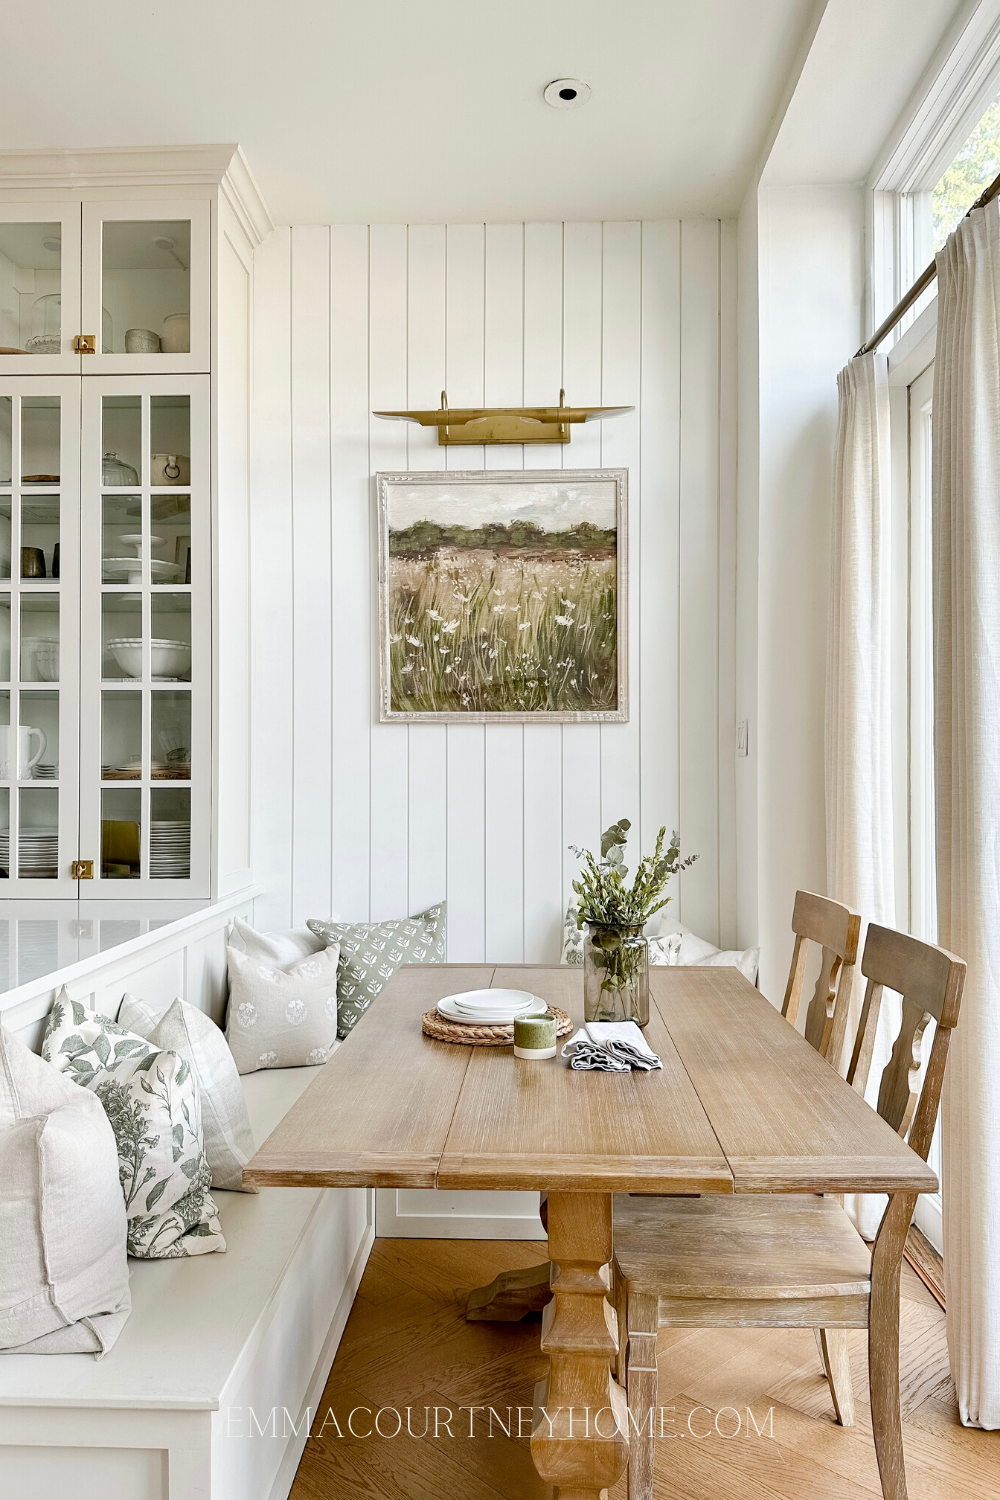 Vertical Shiplap Wall Image by Emma Courtney Home